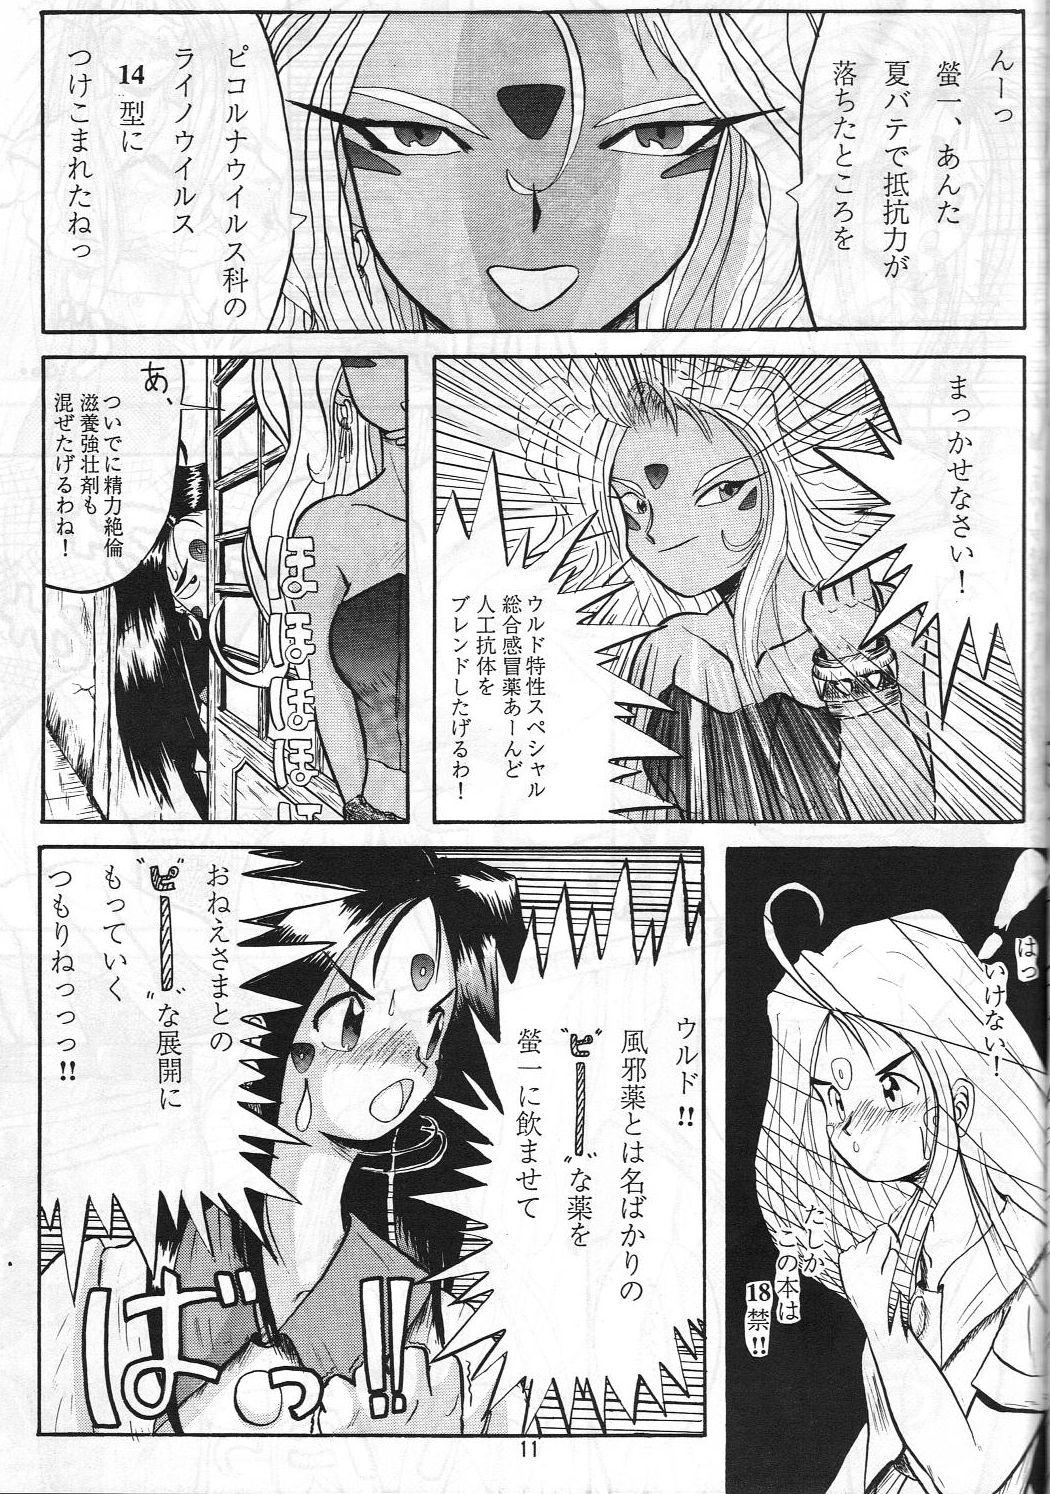 Wrestling Release-1 - Ah my goddess Tenchi muyo Lingerie - Page 12